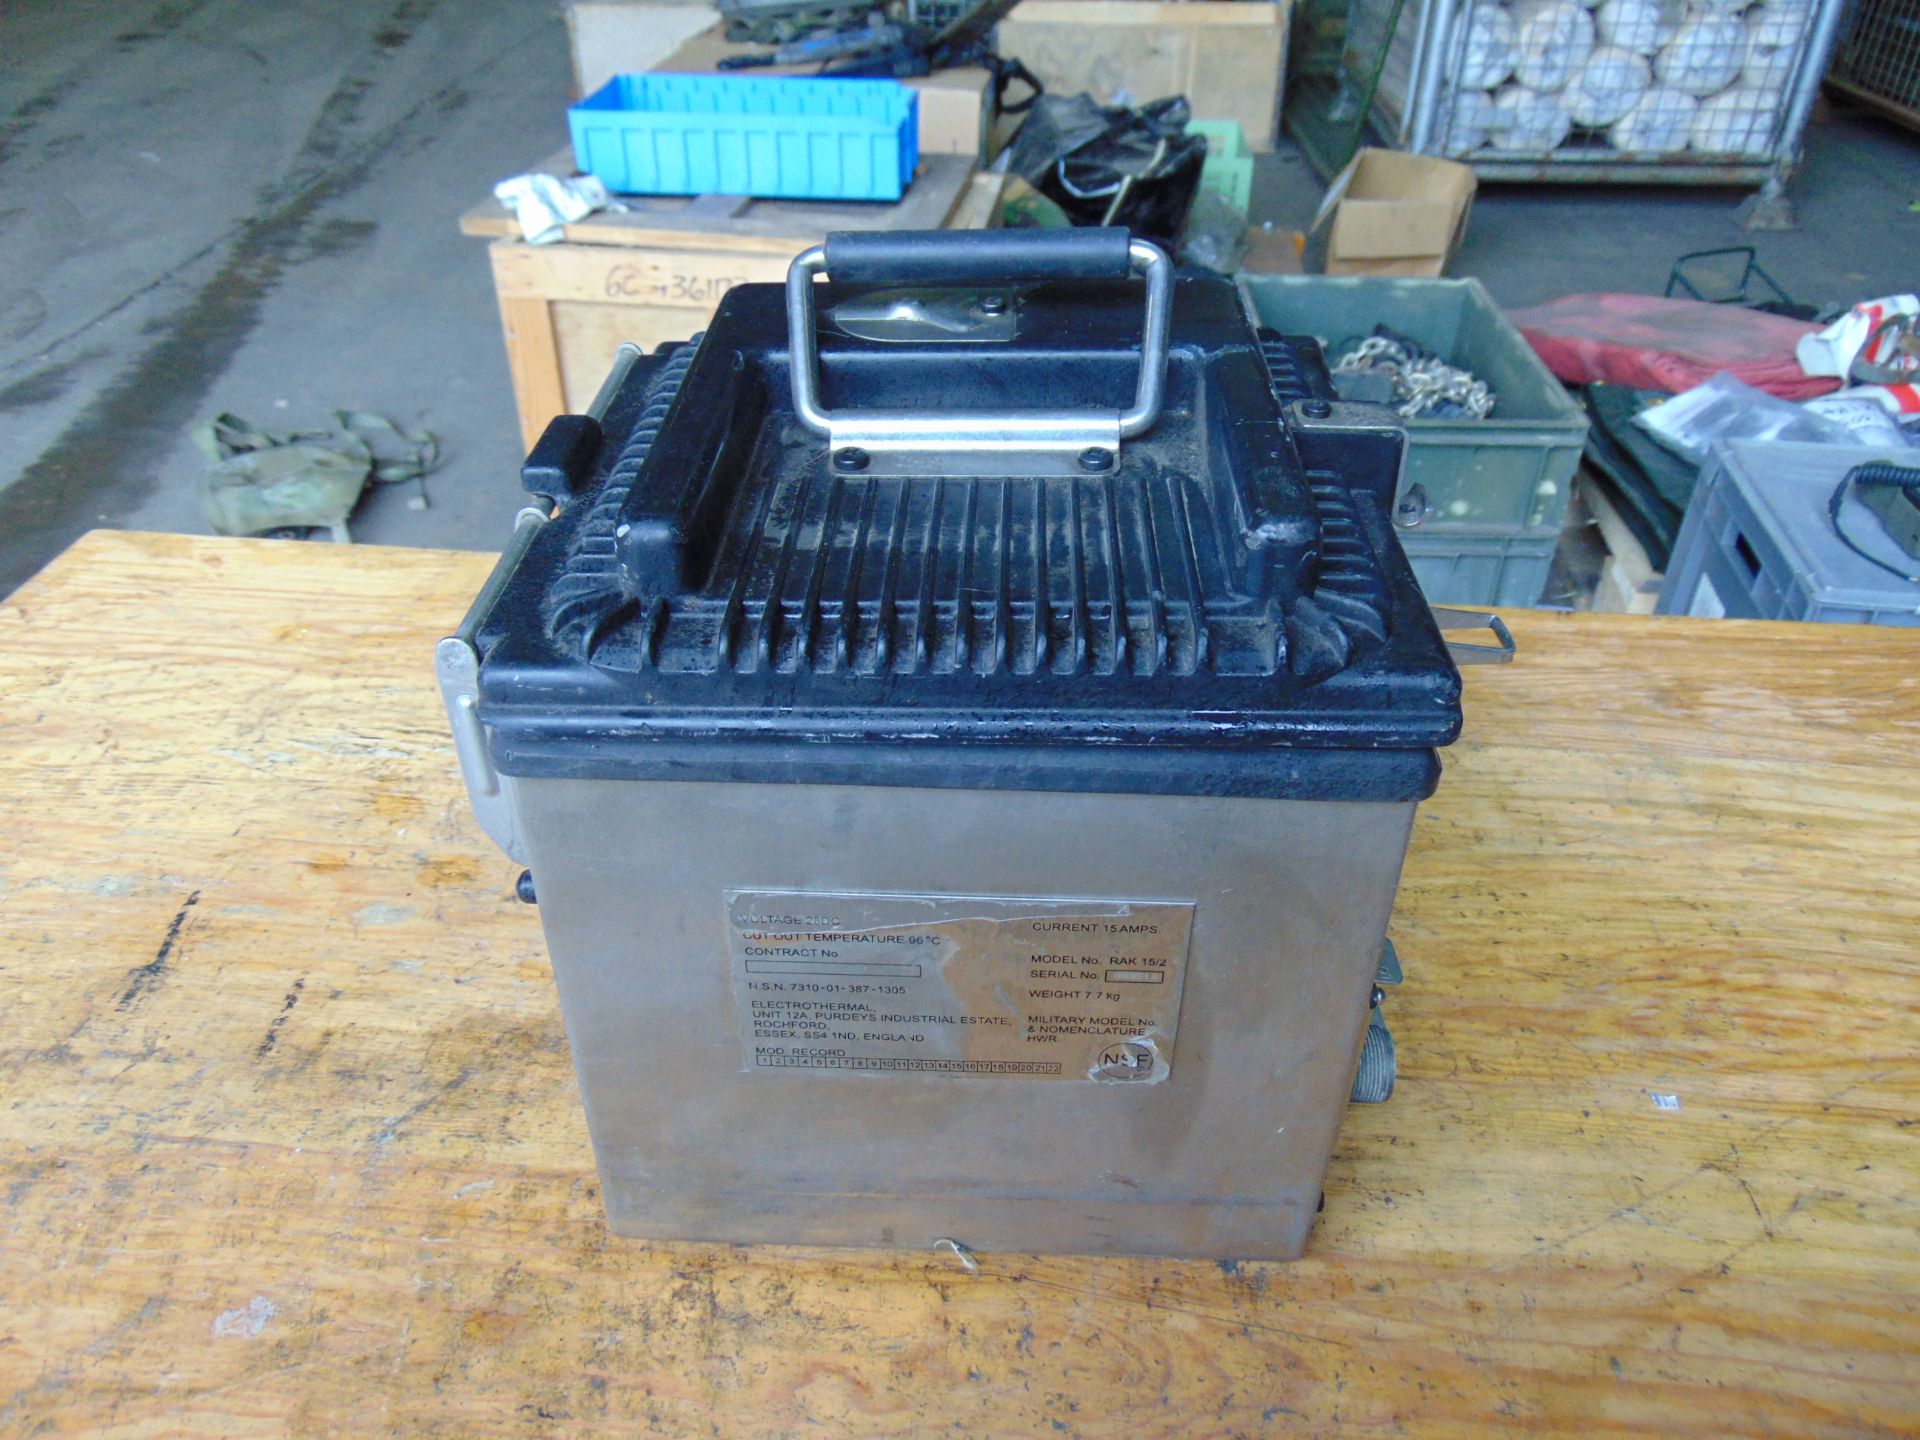 British Army Vehicle Cooker for Cooking & Heating - Bild 7 aus 7